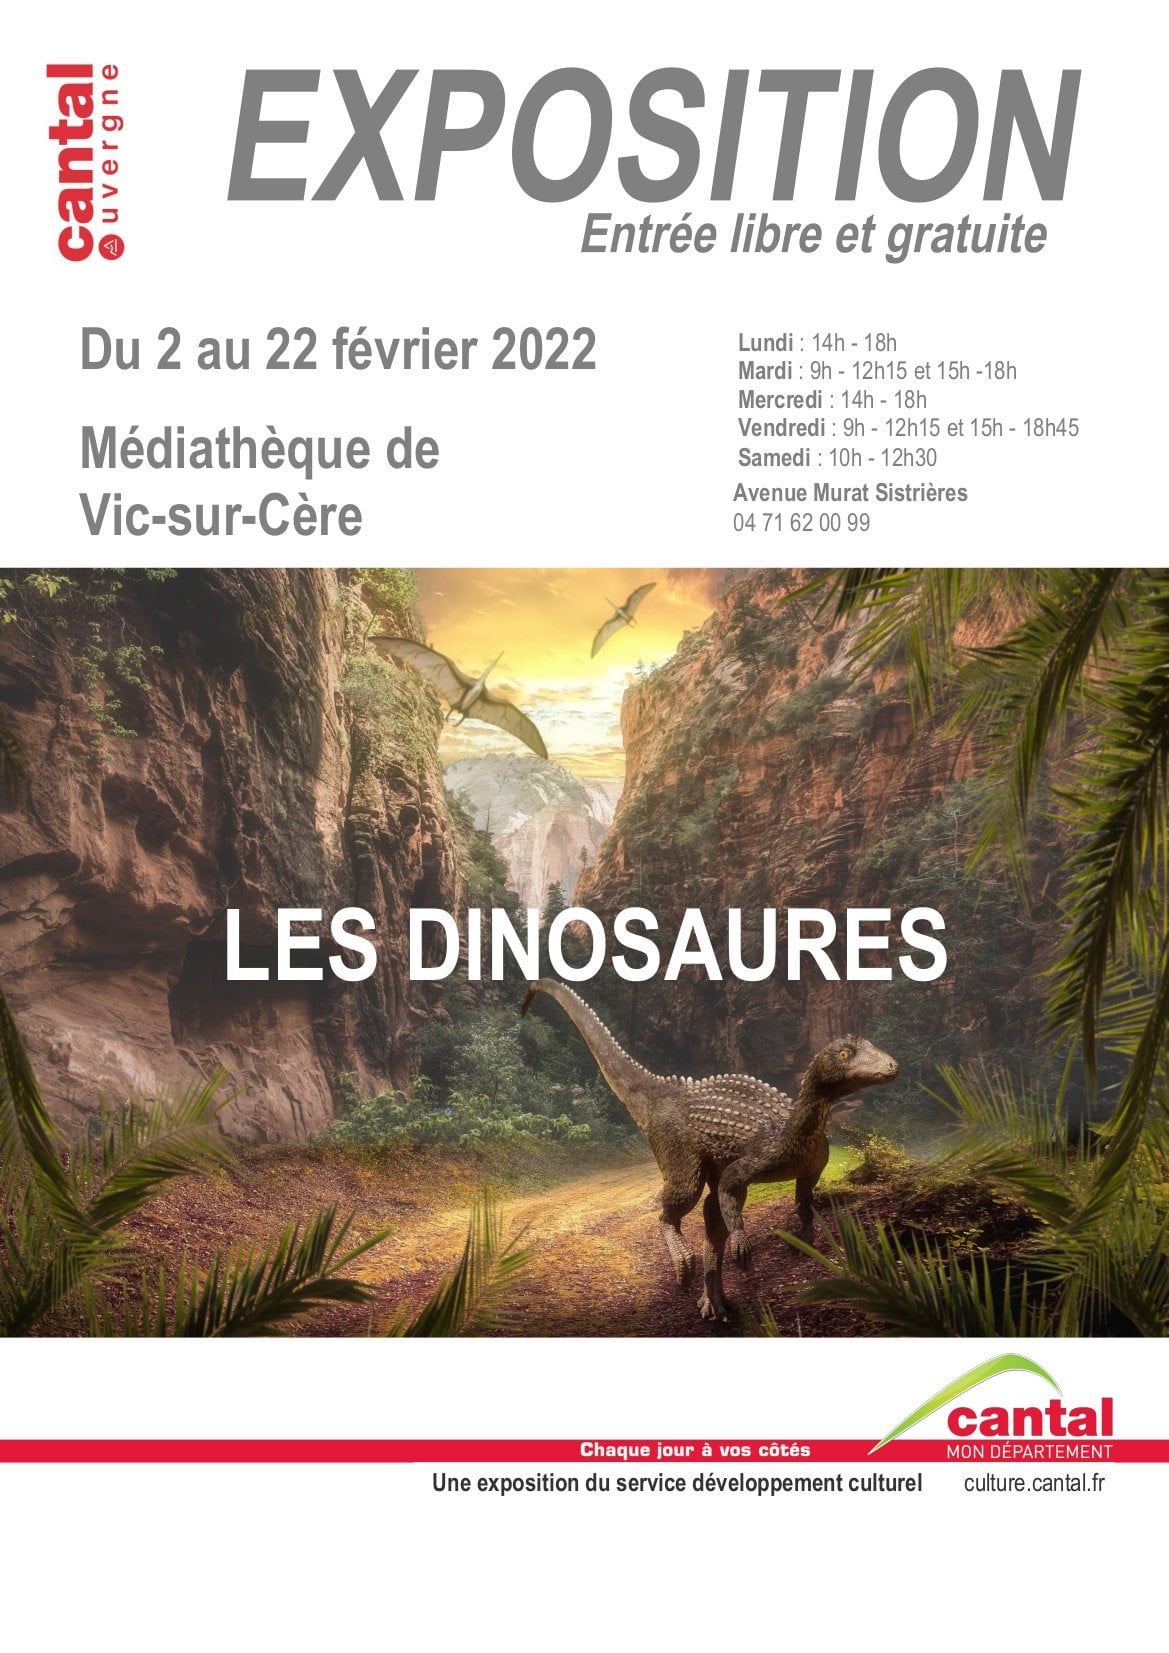 Expo "Les dinosaures"